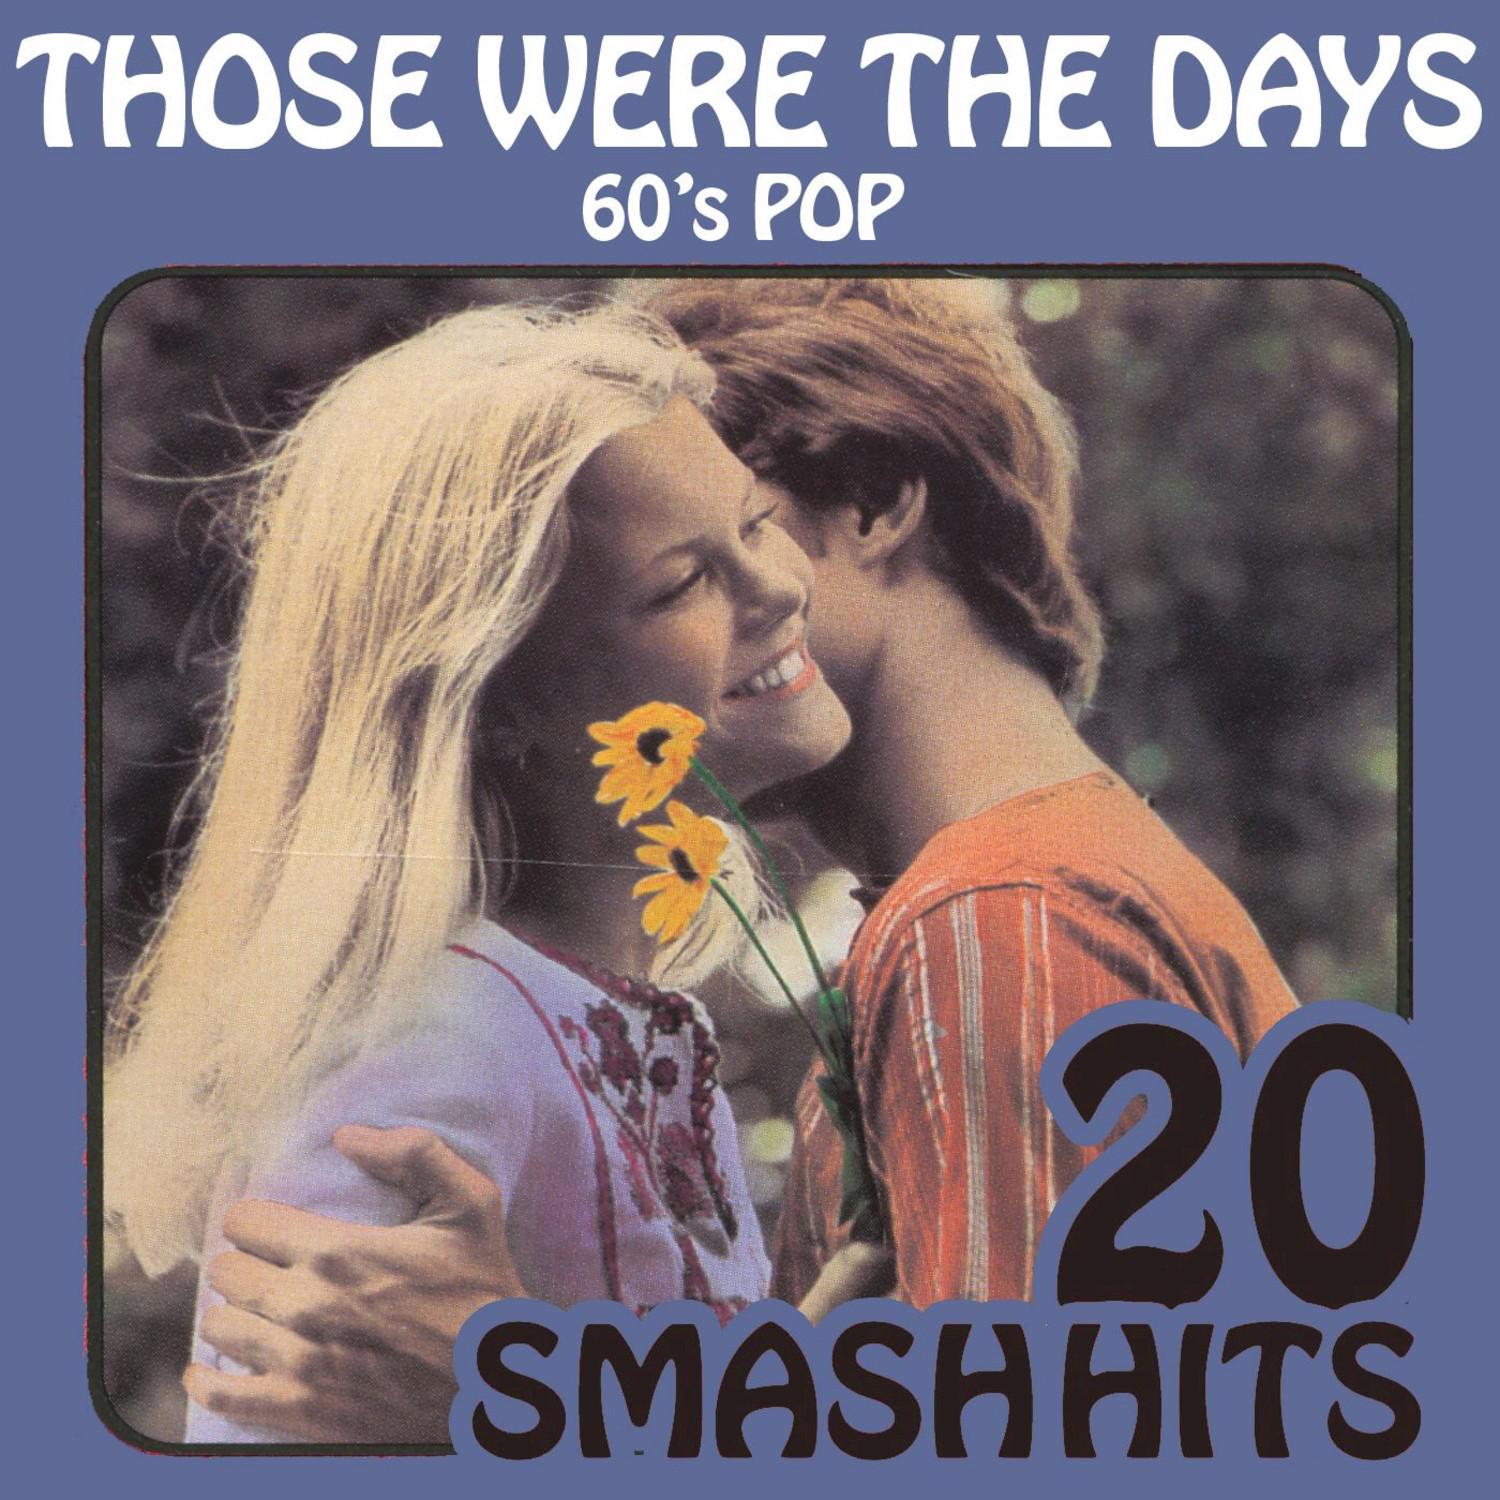 60's Pop - Those Were The Days (Rerecorded Version)